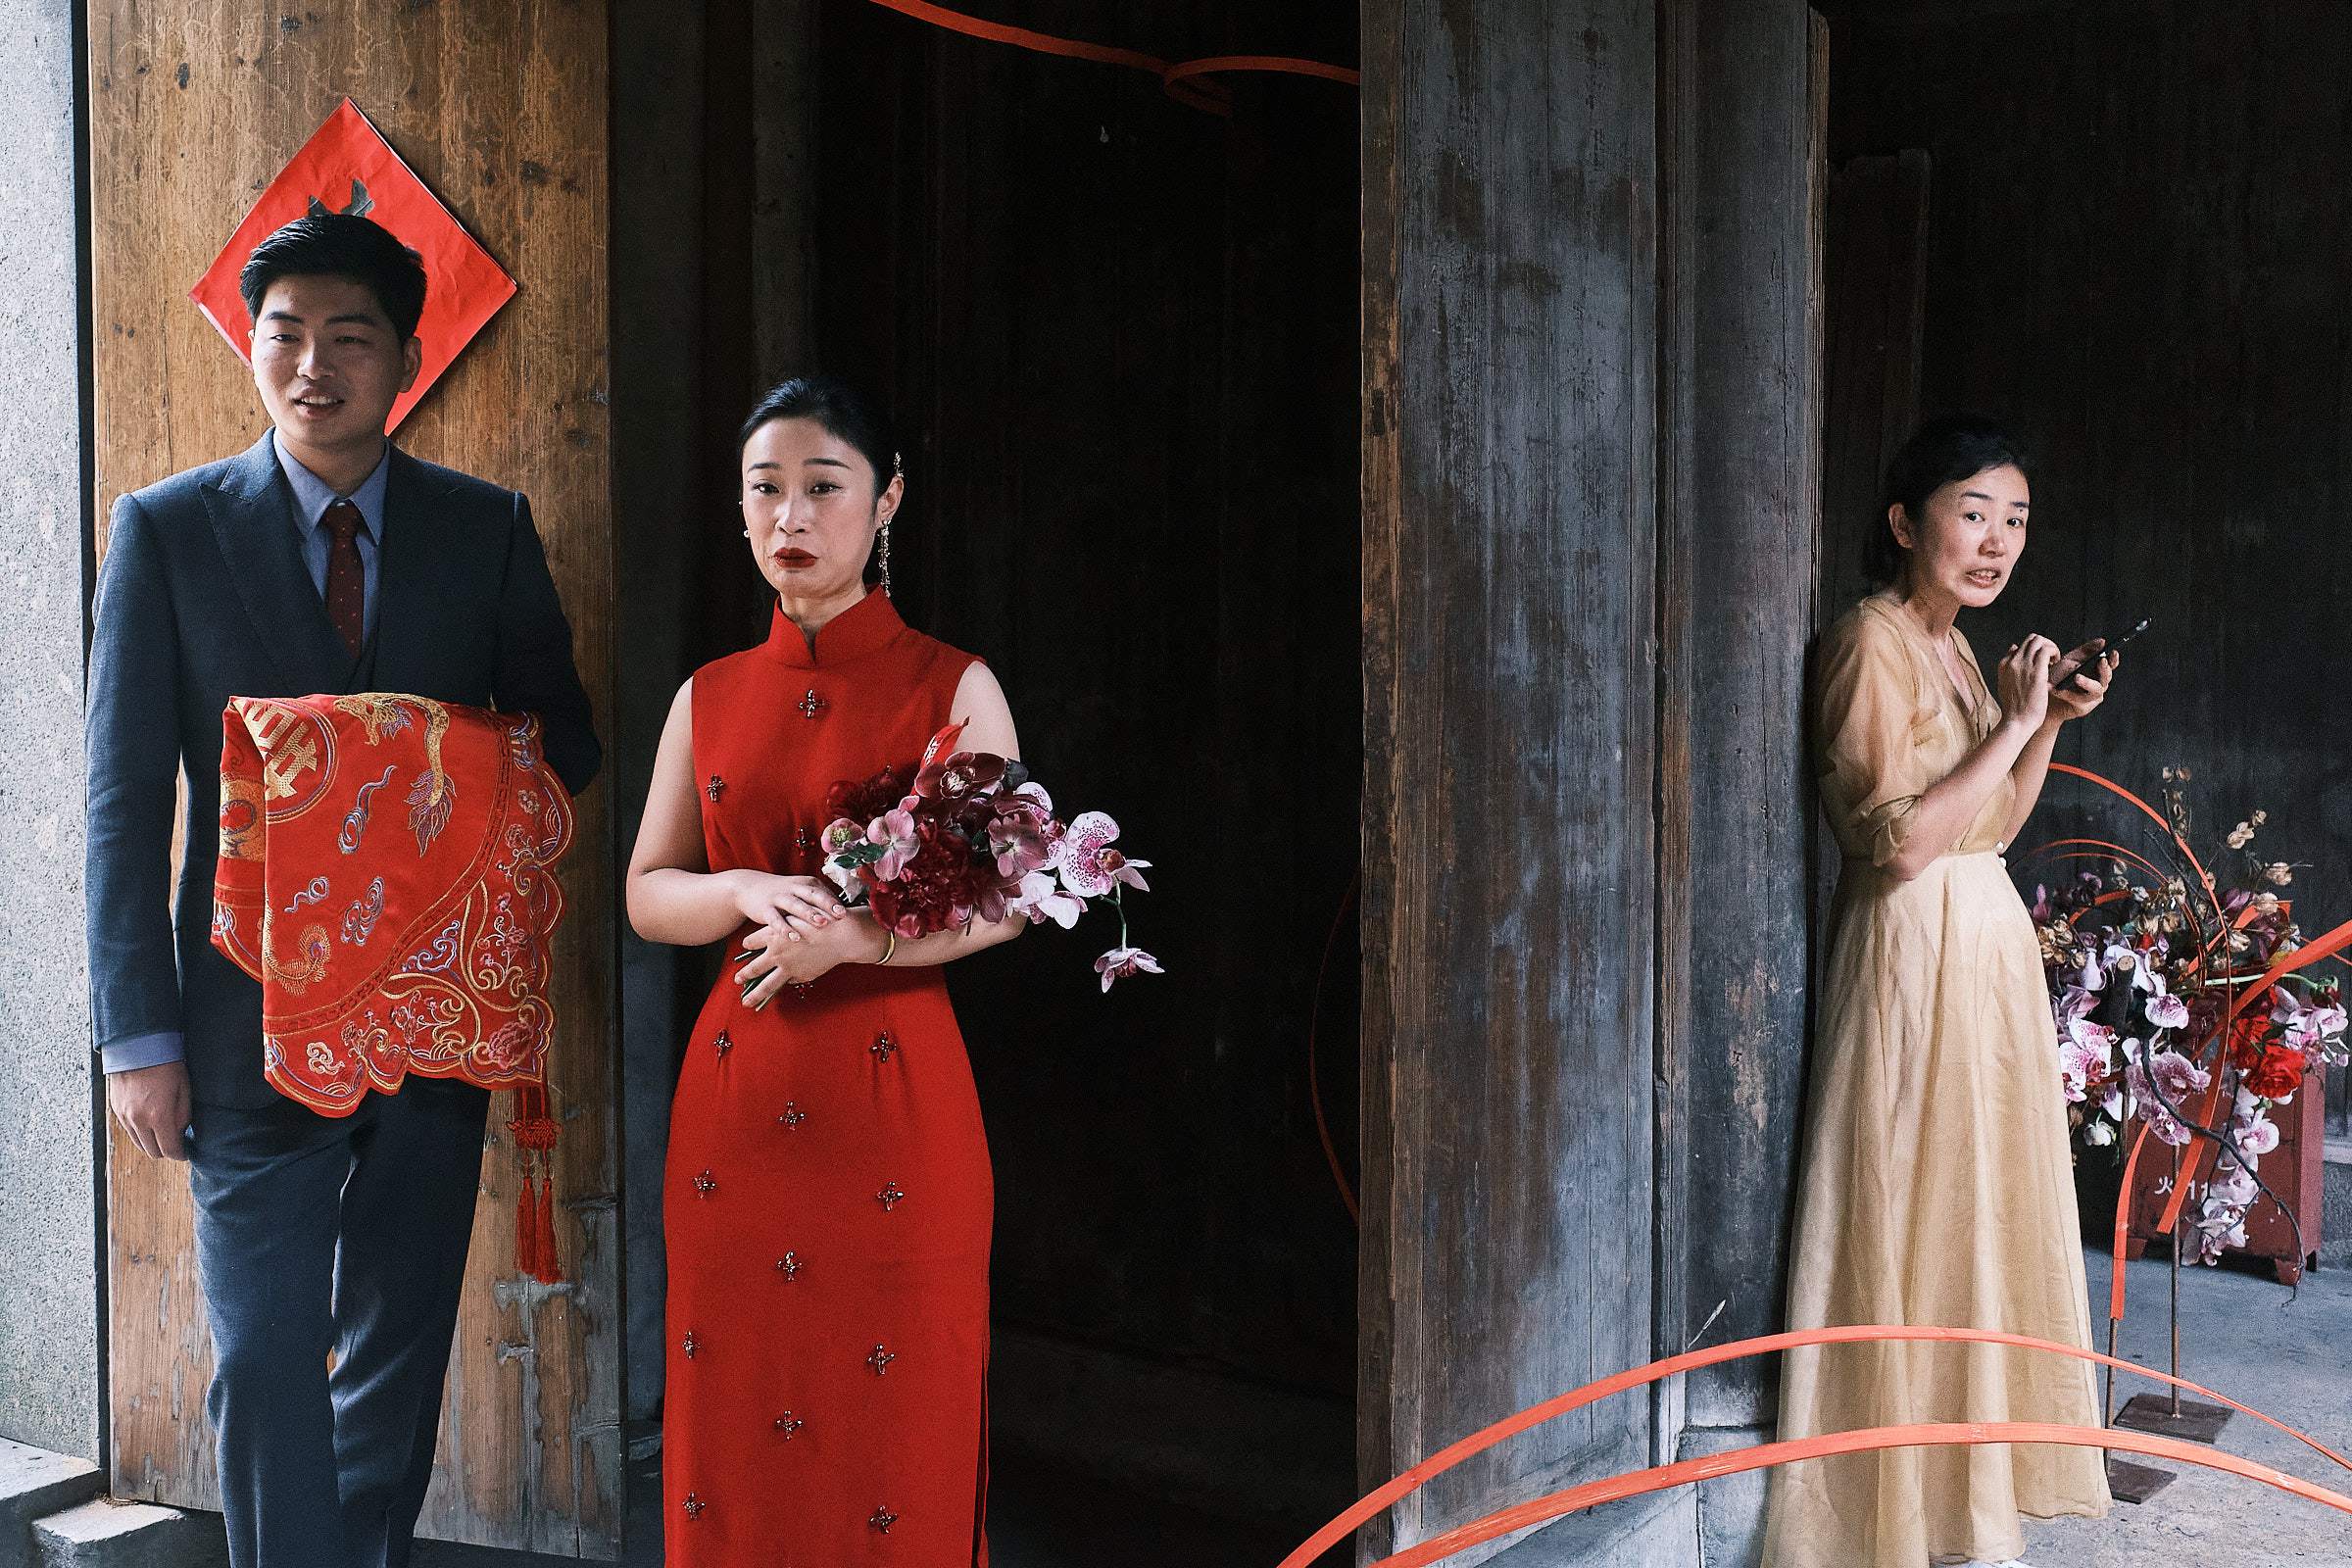 Surprised Faces Of Bride Groom And Florist In Wedding At Hangzhou China